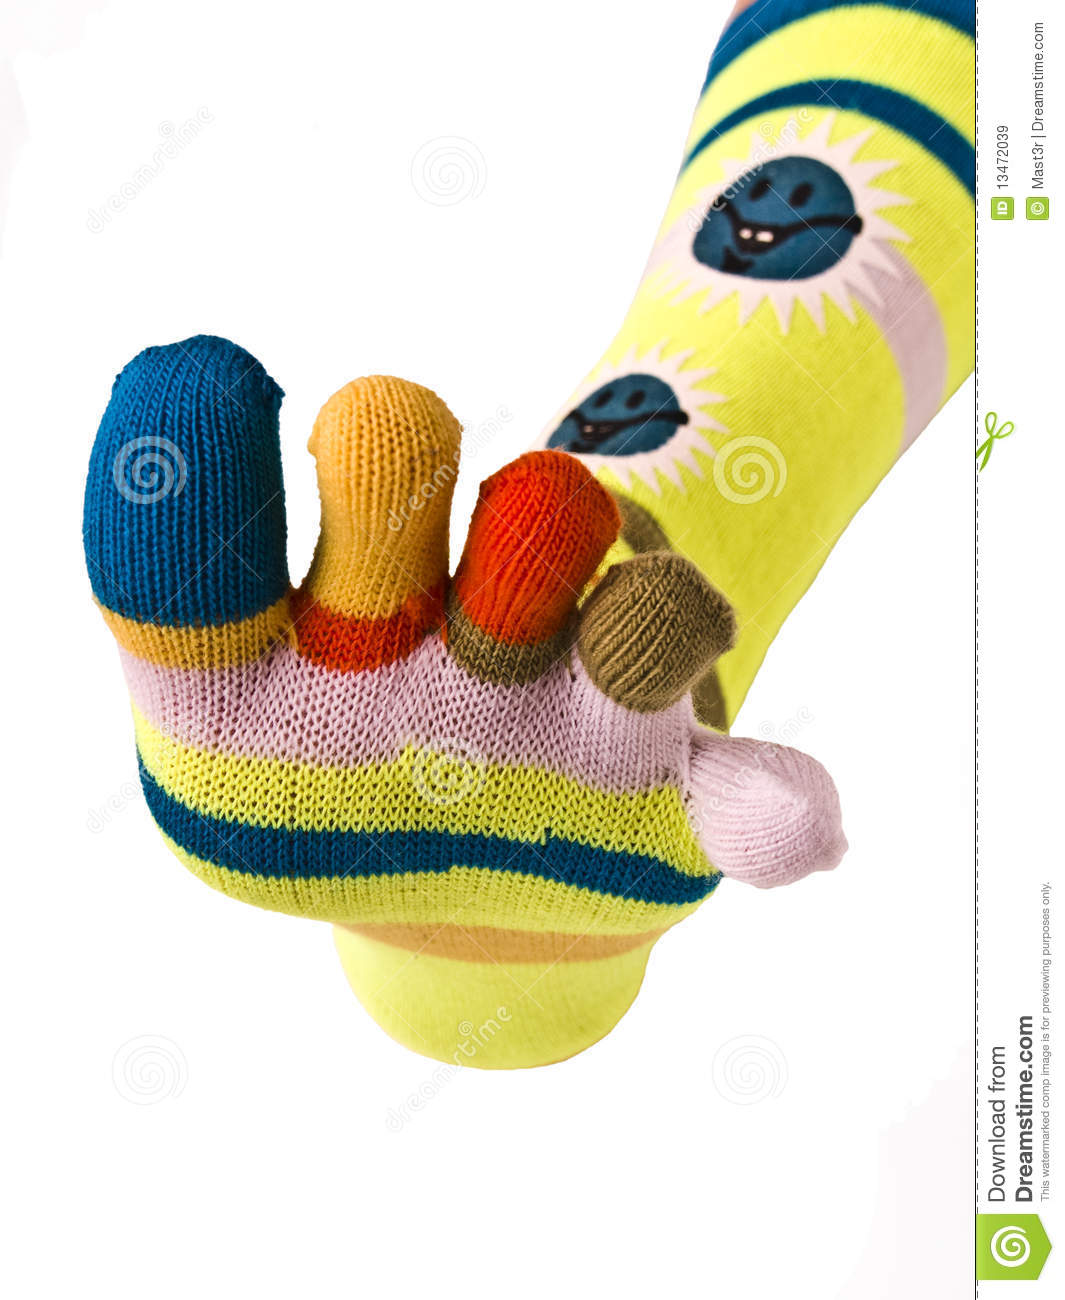 Colorful Socks Royalty Free Stock Images   Image  13472039